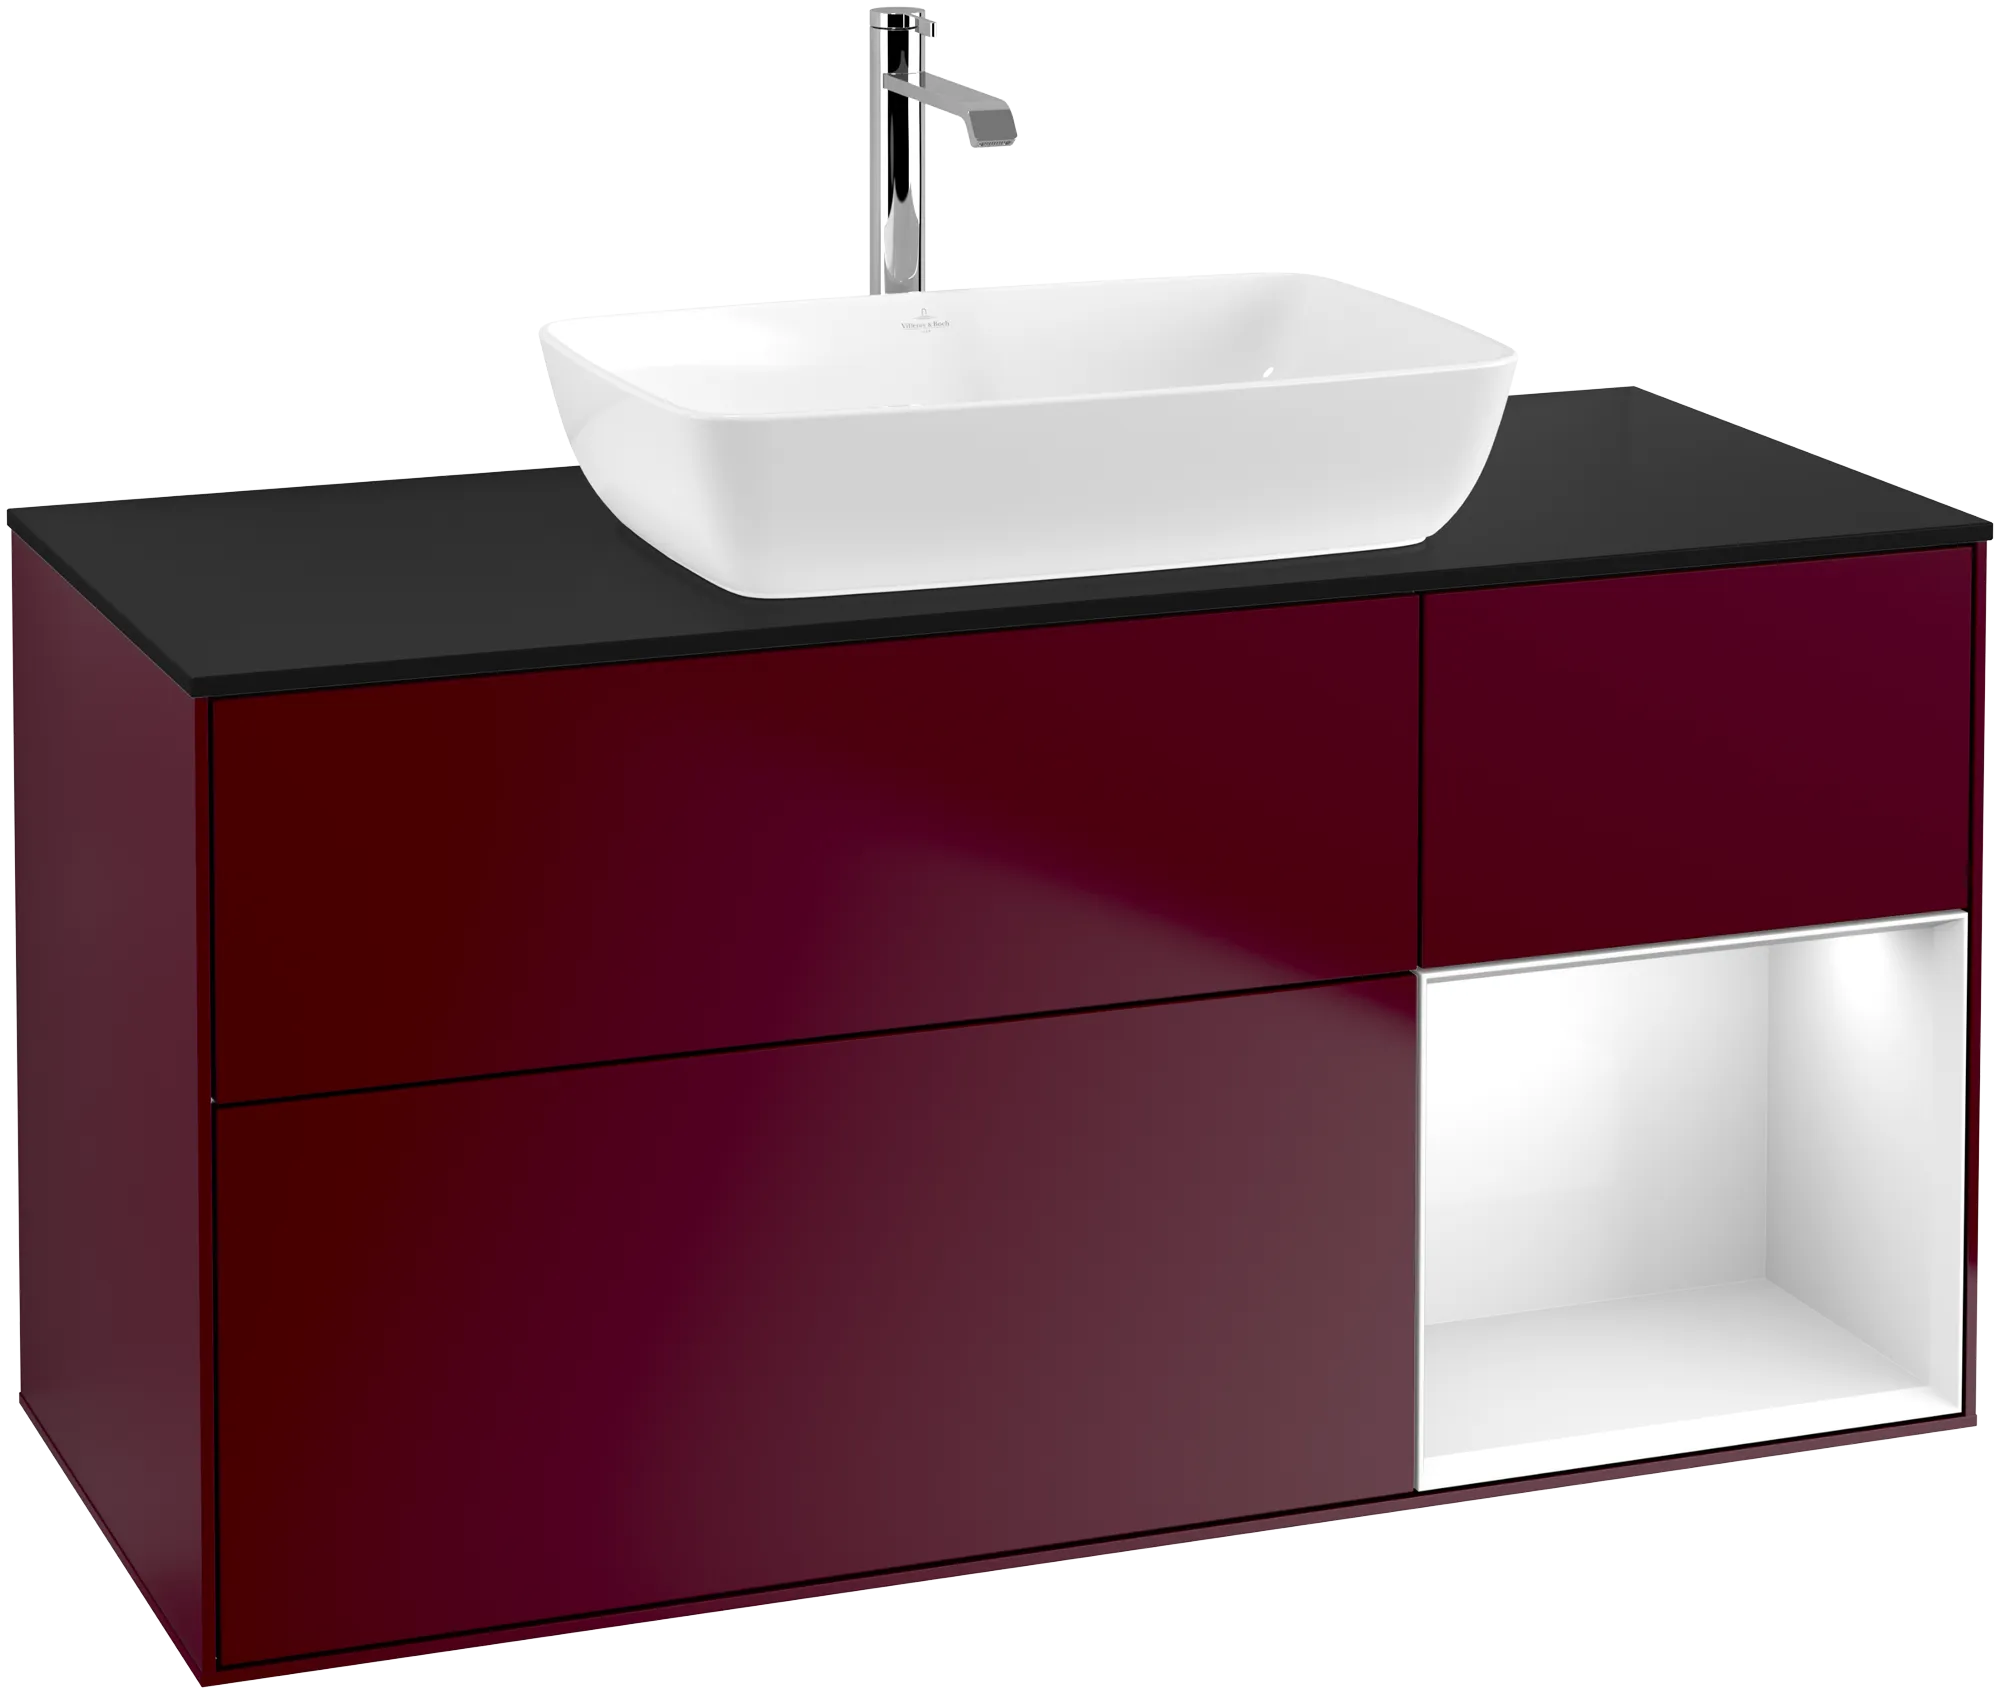 Obrázek VILLEROY BOCH Finion Vanity unit, with lighting, 3 pull-out compartments, 1200 x 603 x 501 mm, Peony Matt Lacquer / Glossy White Lacquer / Glass Black Matt #G832GFHB